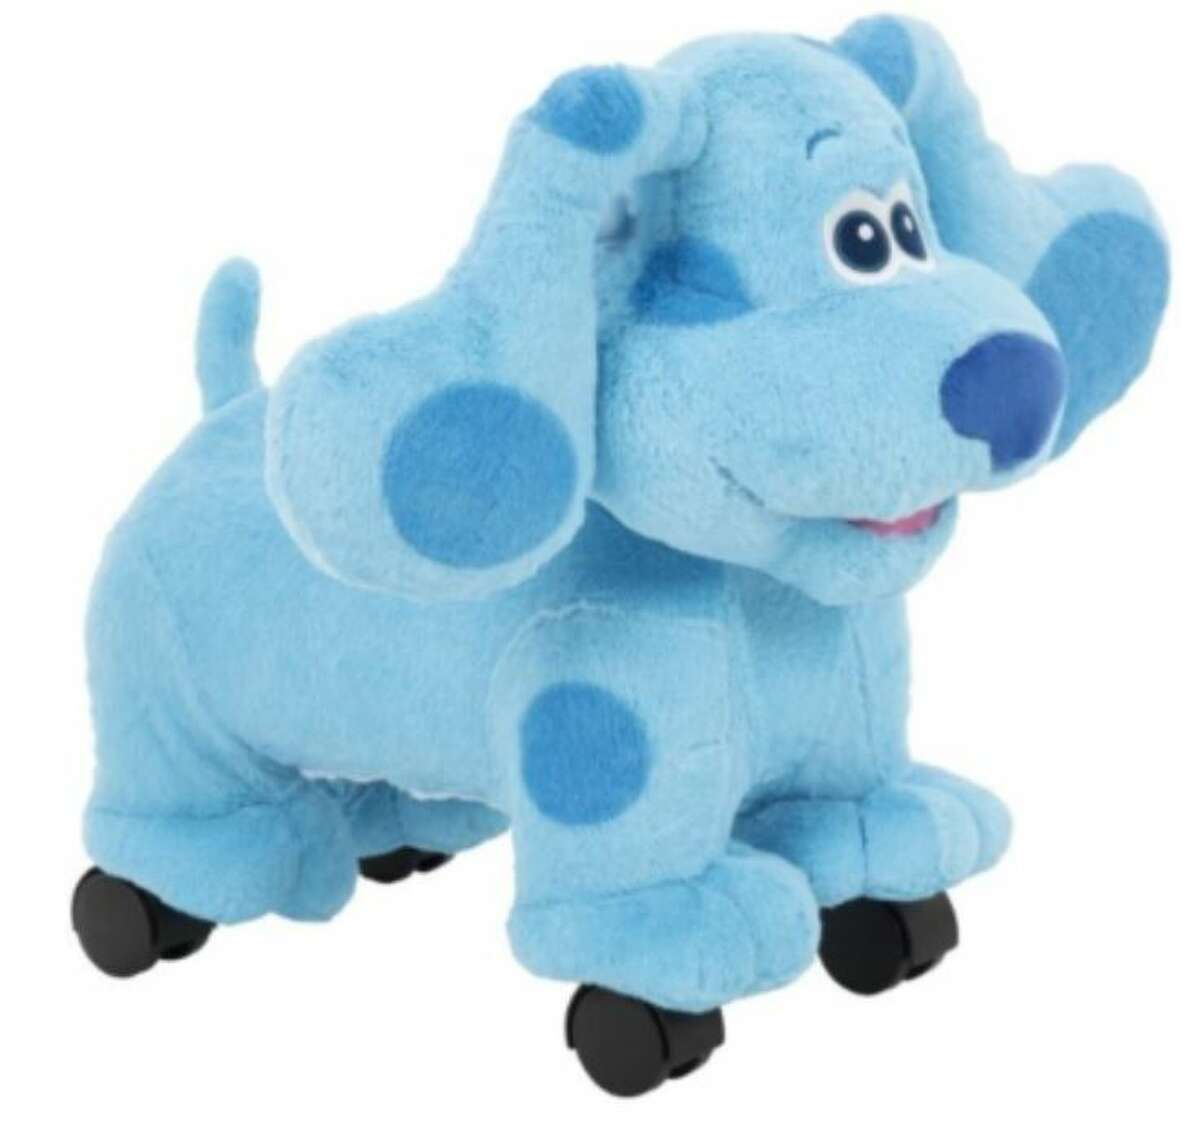 In August Huffy recalled Blue's Clues Foot to Floor Ride-on Toys because they can tip forward when a young child is riding it, posing fall and injury hazards to children. The item was among those listed in the 37th annual “Trouble in Toyland” report released Tuesday by the Illinois Public Interest Research Group Education Fund.